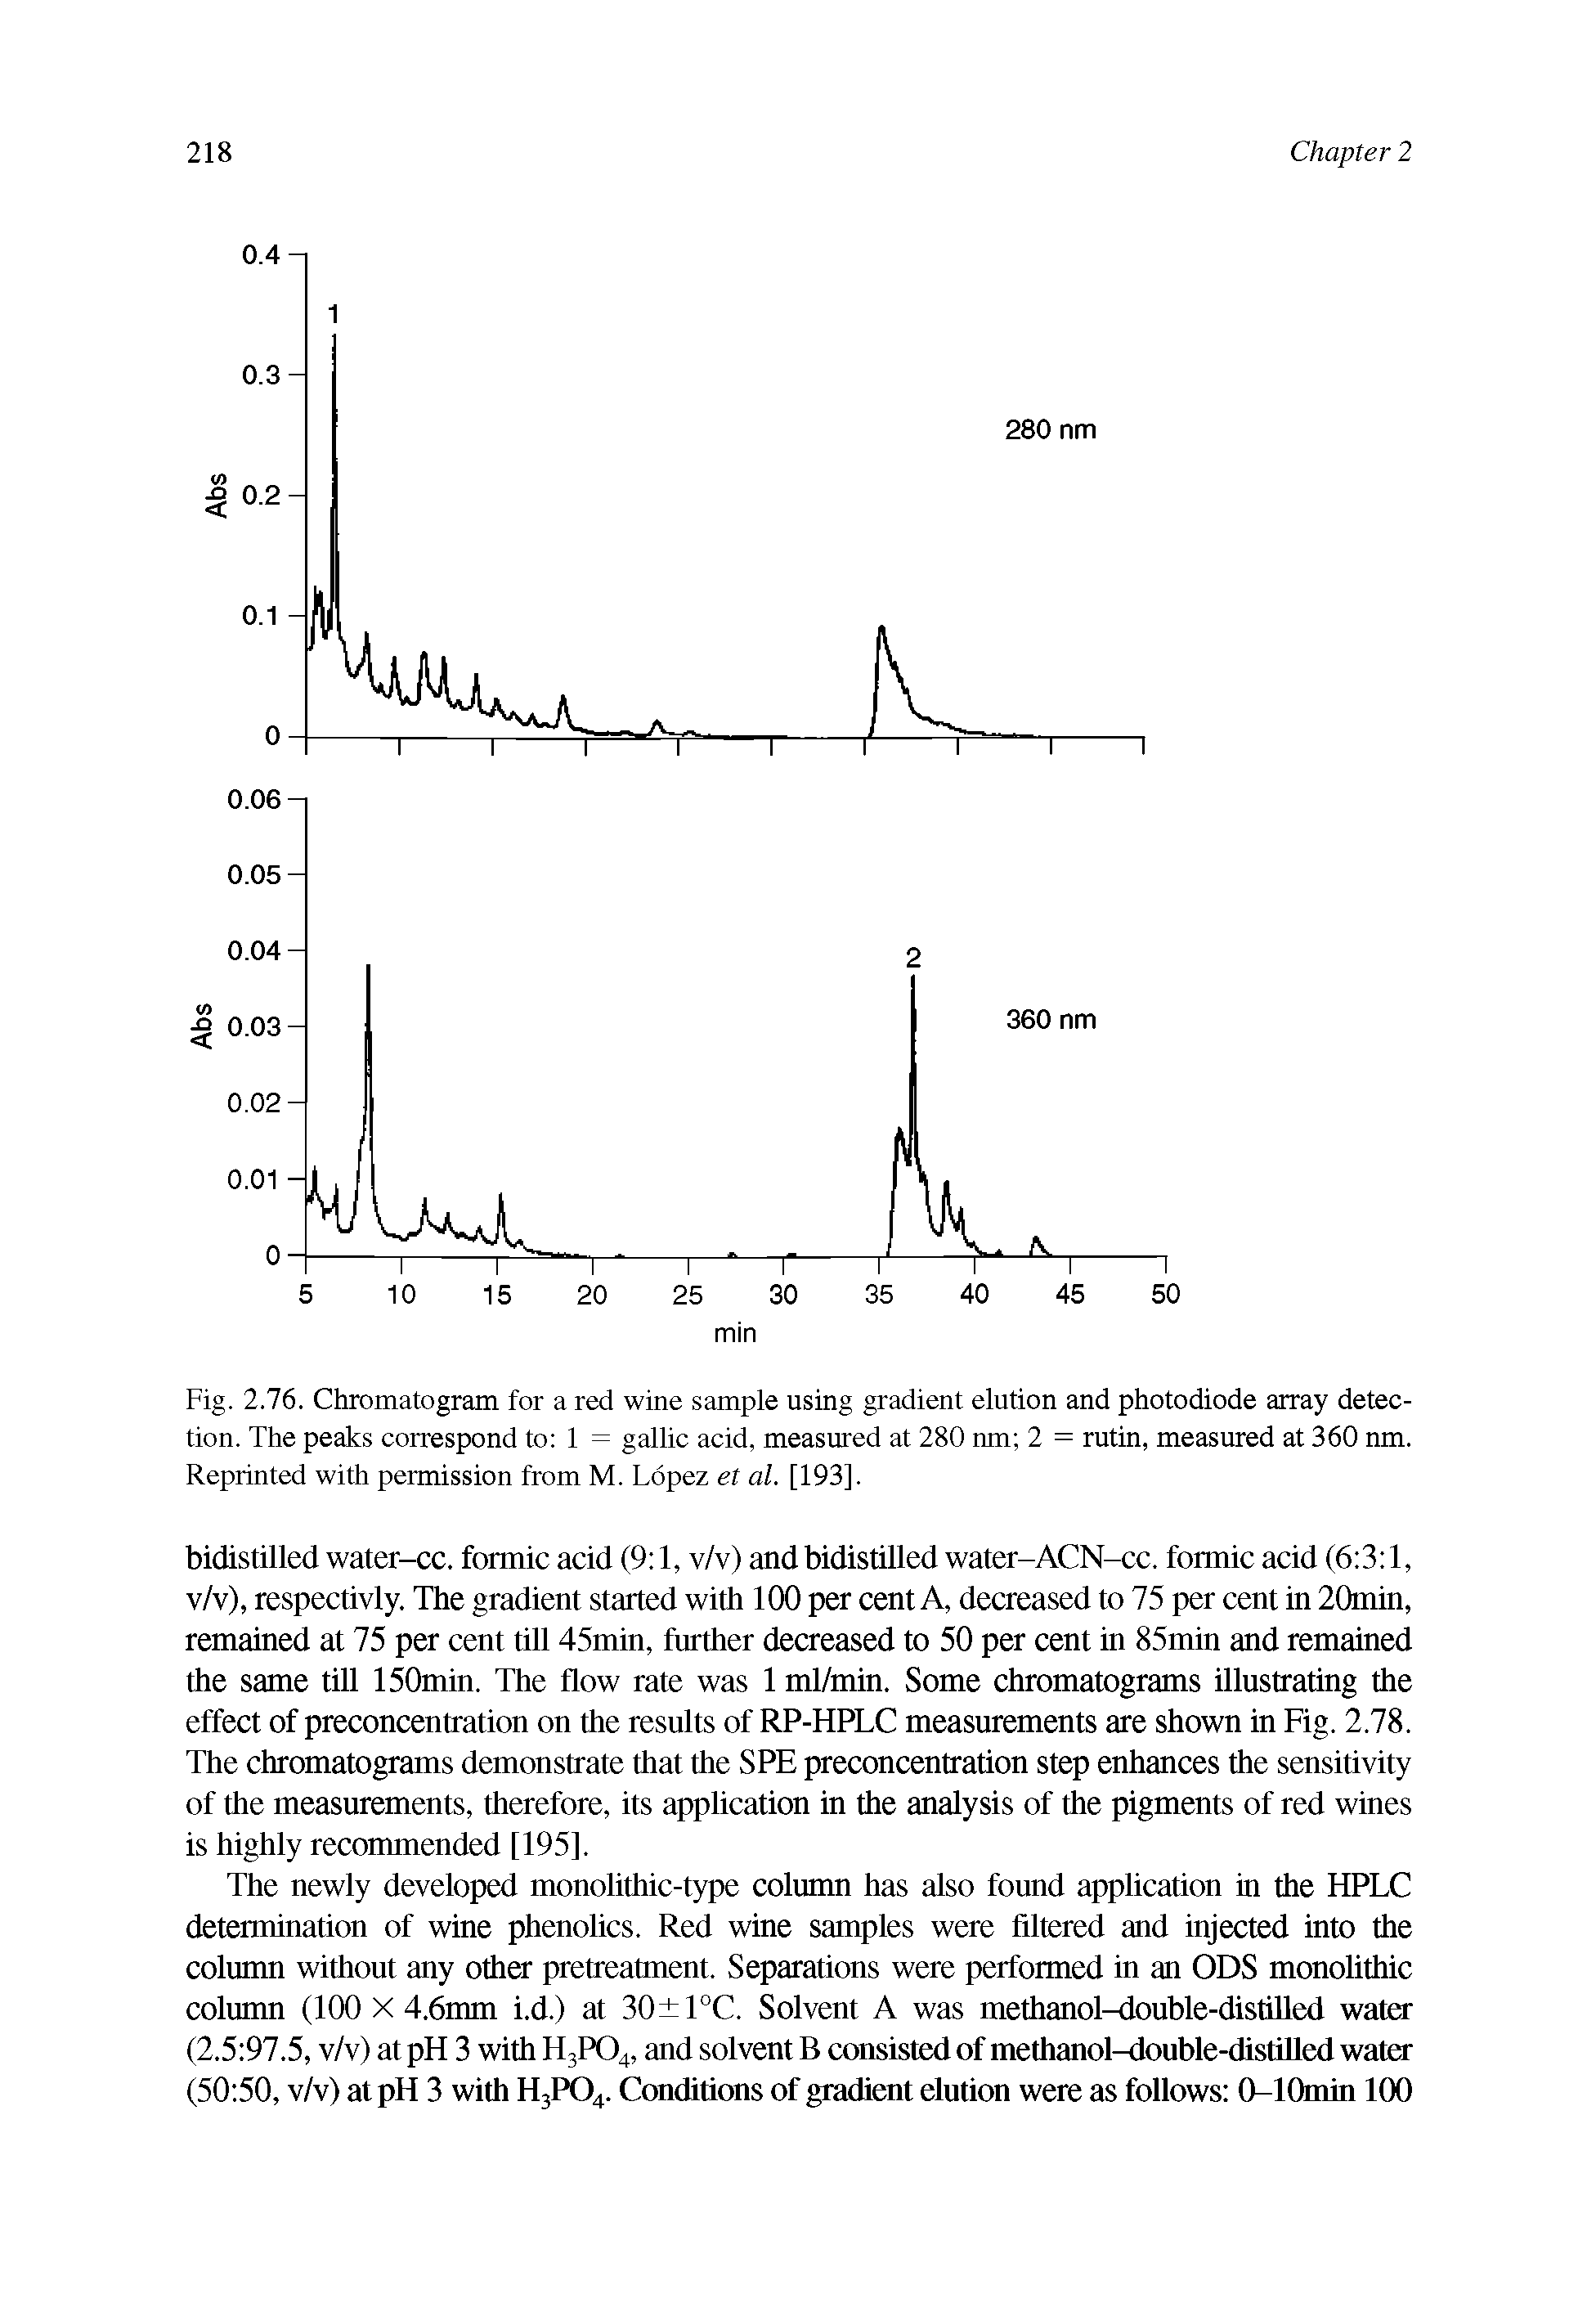 Fig. 2.76. Chromatogram for a red wine sample using gradient elution and photodiode array detection. The peaks correspond to 1 = gallic acid, measured at 280 nm 2 = rutin, measured at 360 nm. Reprinted with permission from M. Lopez et al. [193].